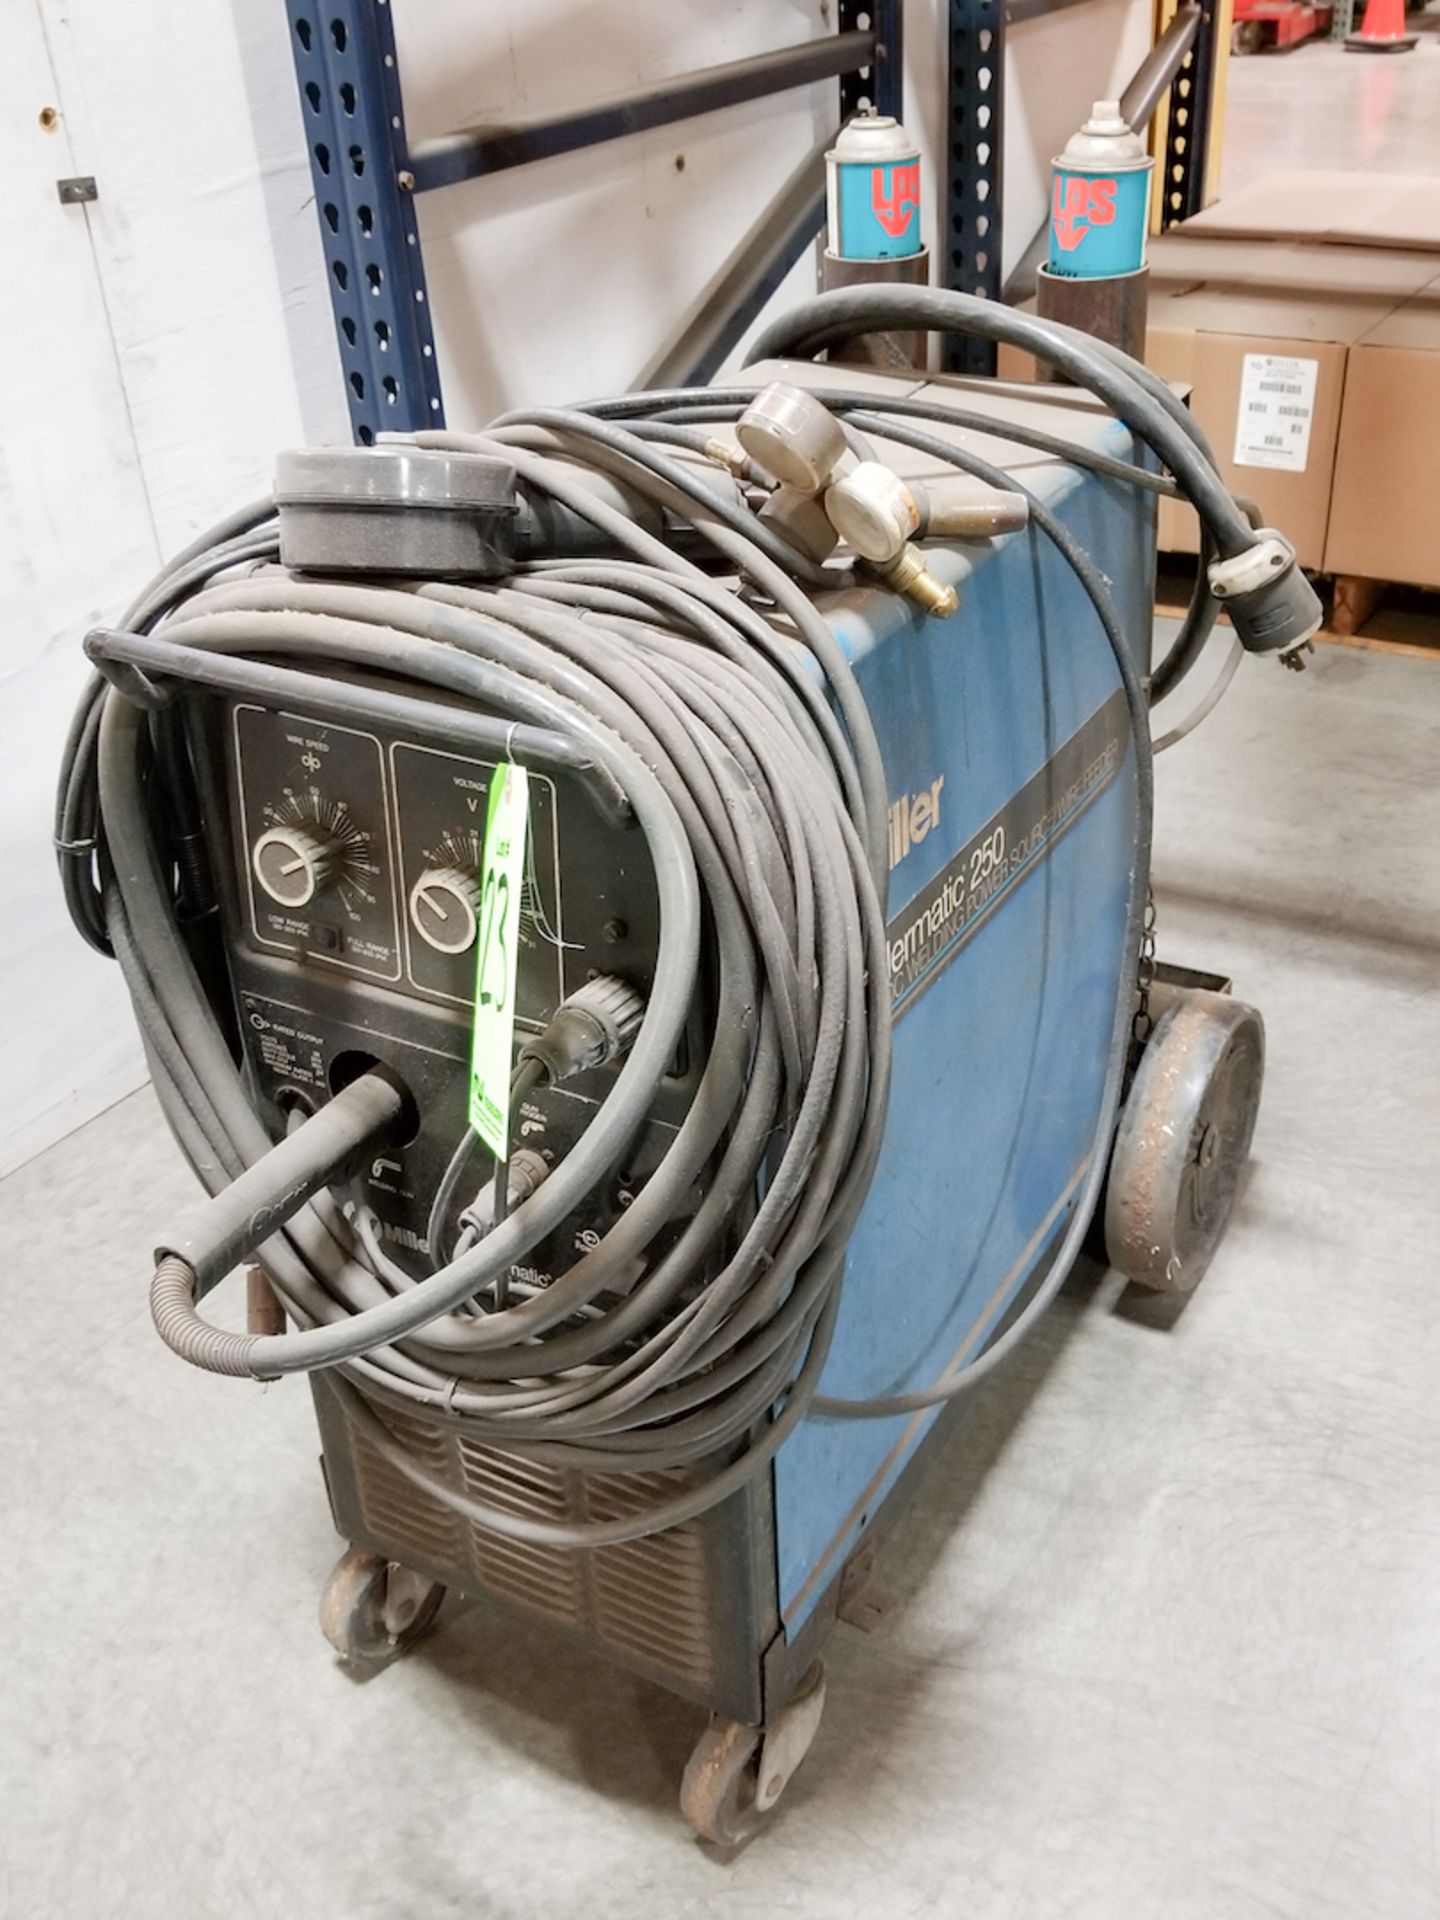 Millermatic Model 250 CV/DC Welding Power Supply and Wire Feeder